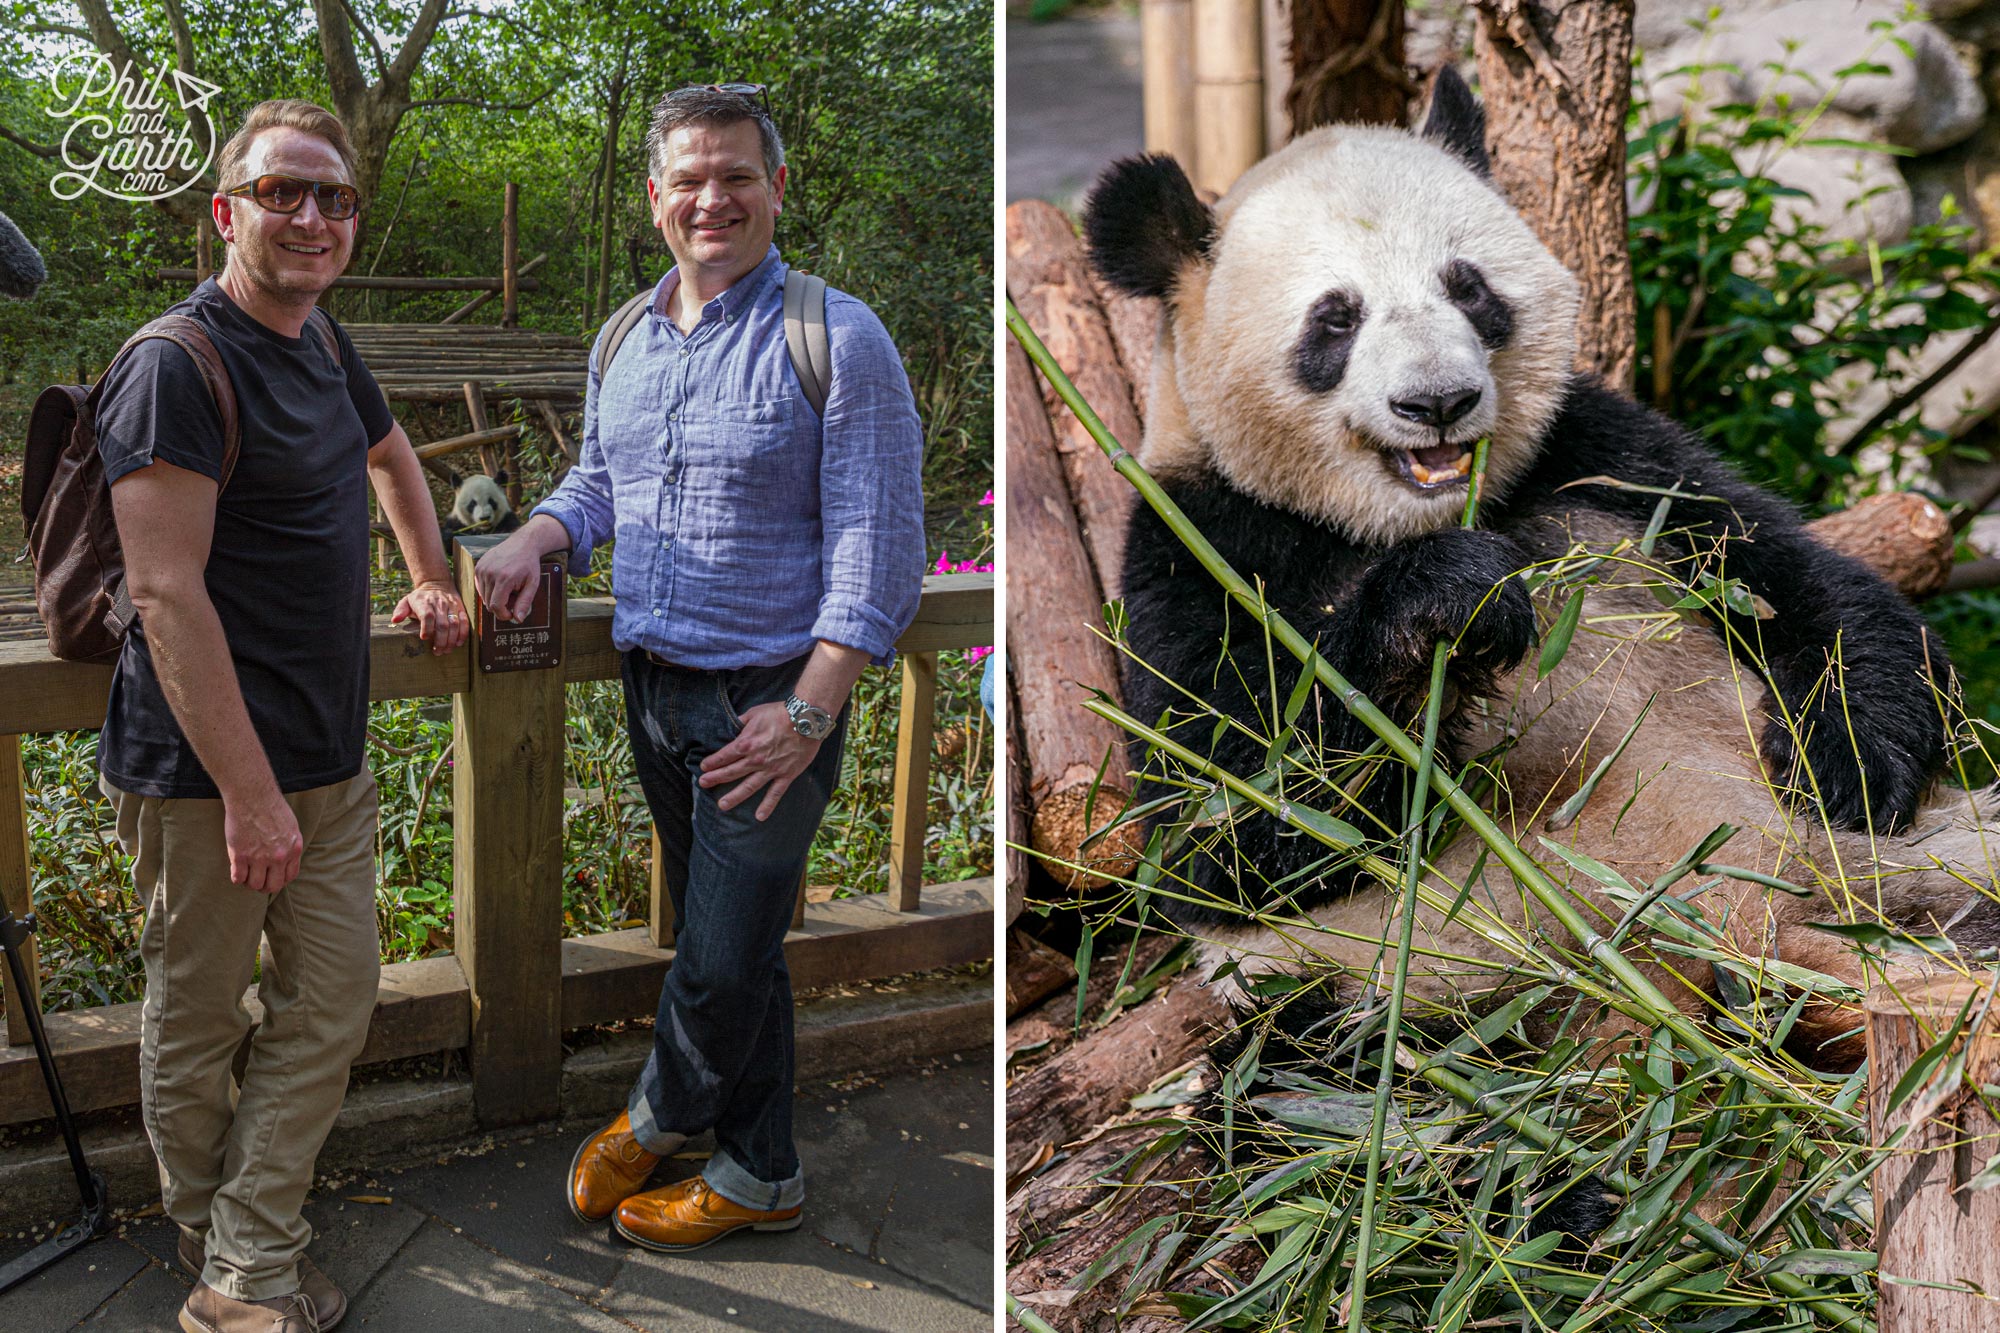 So happy to see giant pandas for the first time and in China!